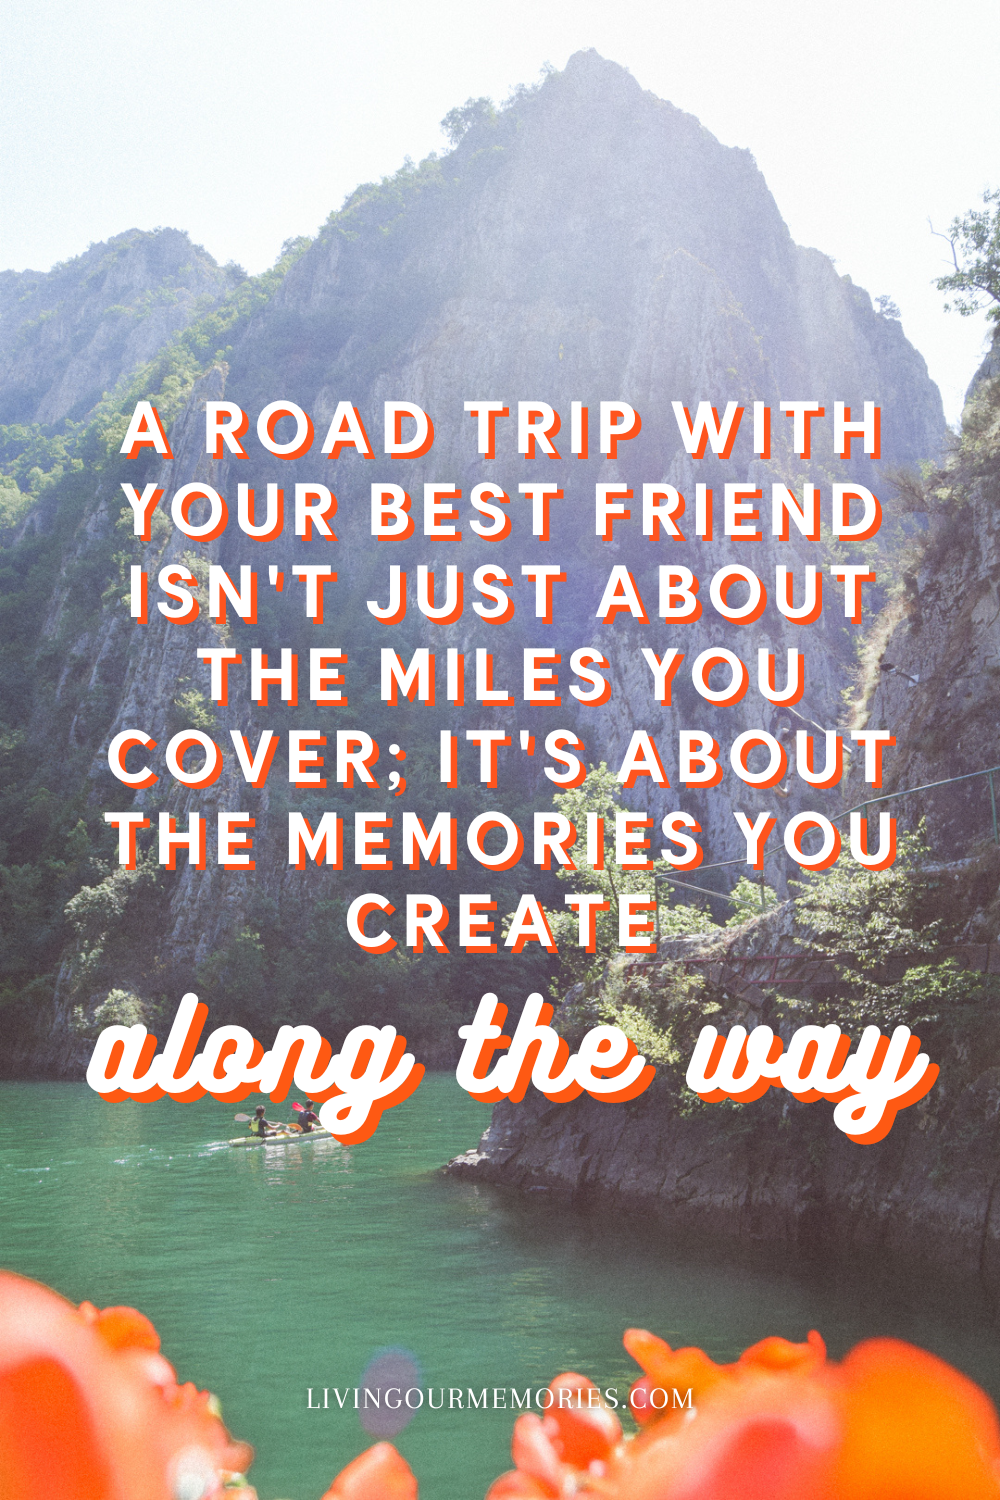 A road trip with your best friend isn't just about the miles you cover; it's about the memories you create along the way.